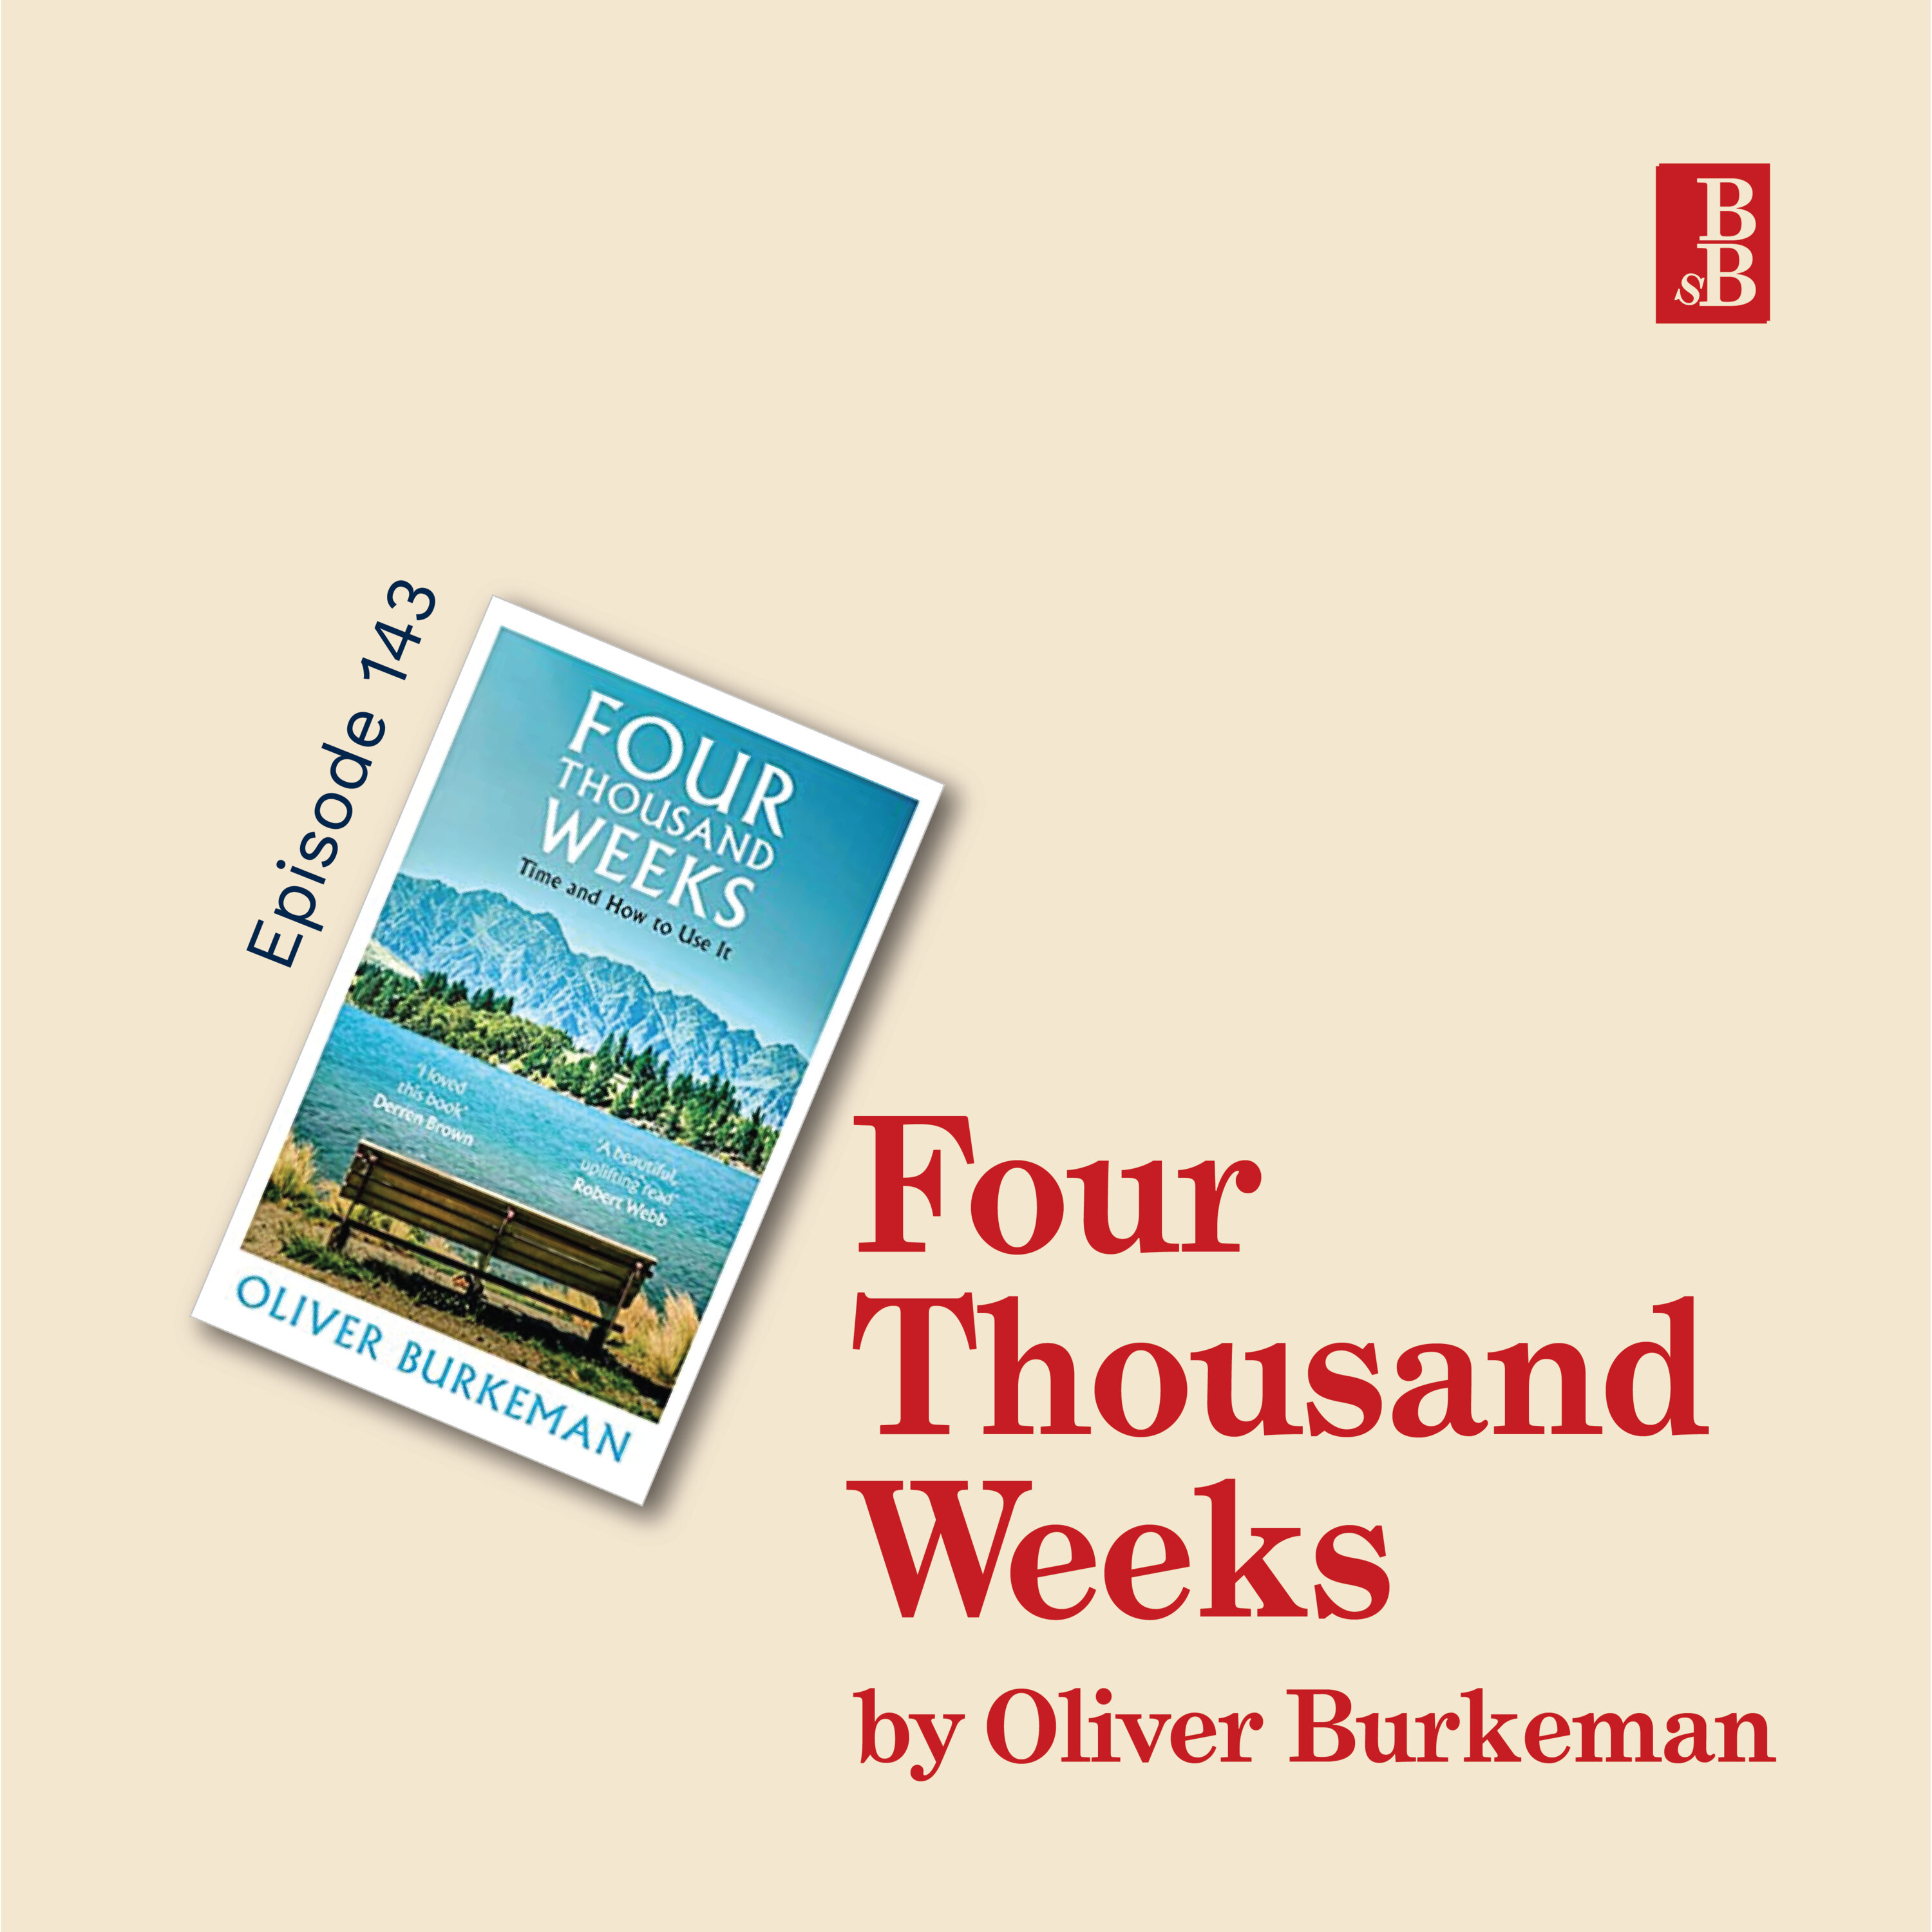 Four Thousand Weeks by Oliver Burkeman: how to make the most of your limited time on earth